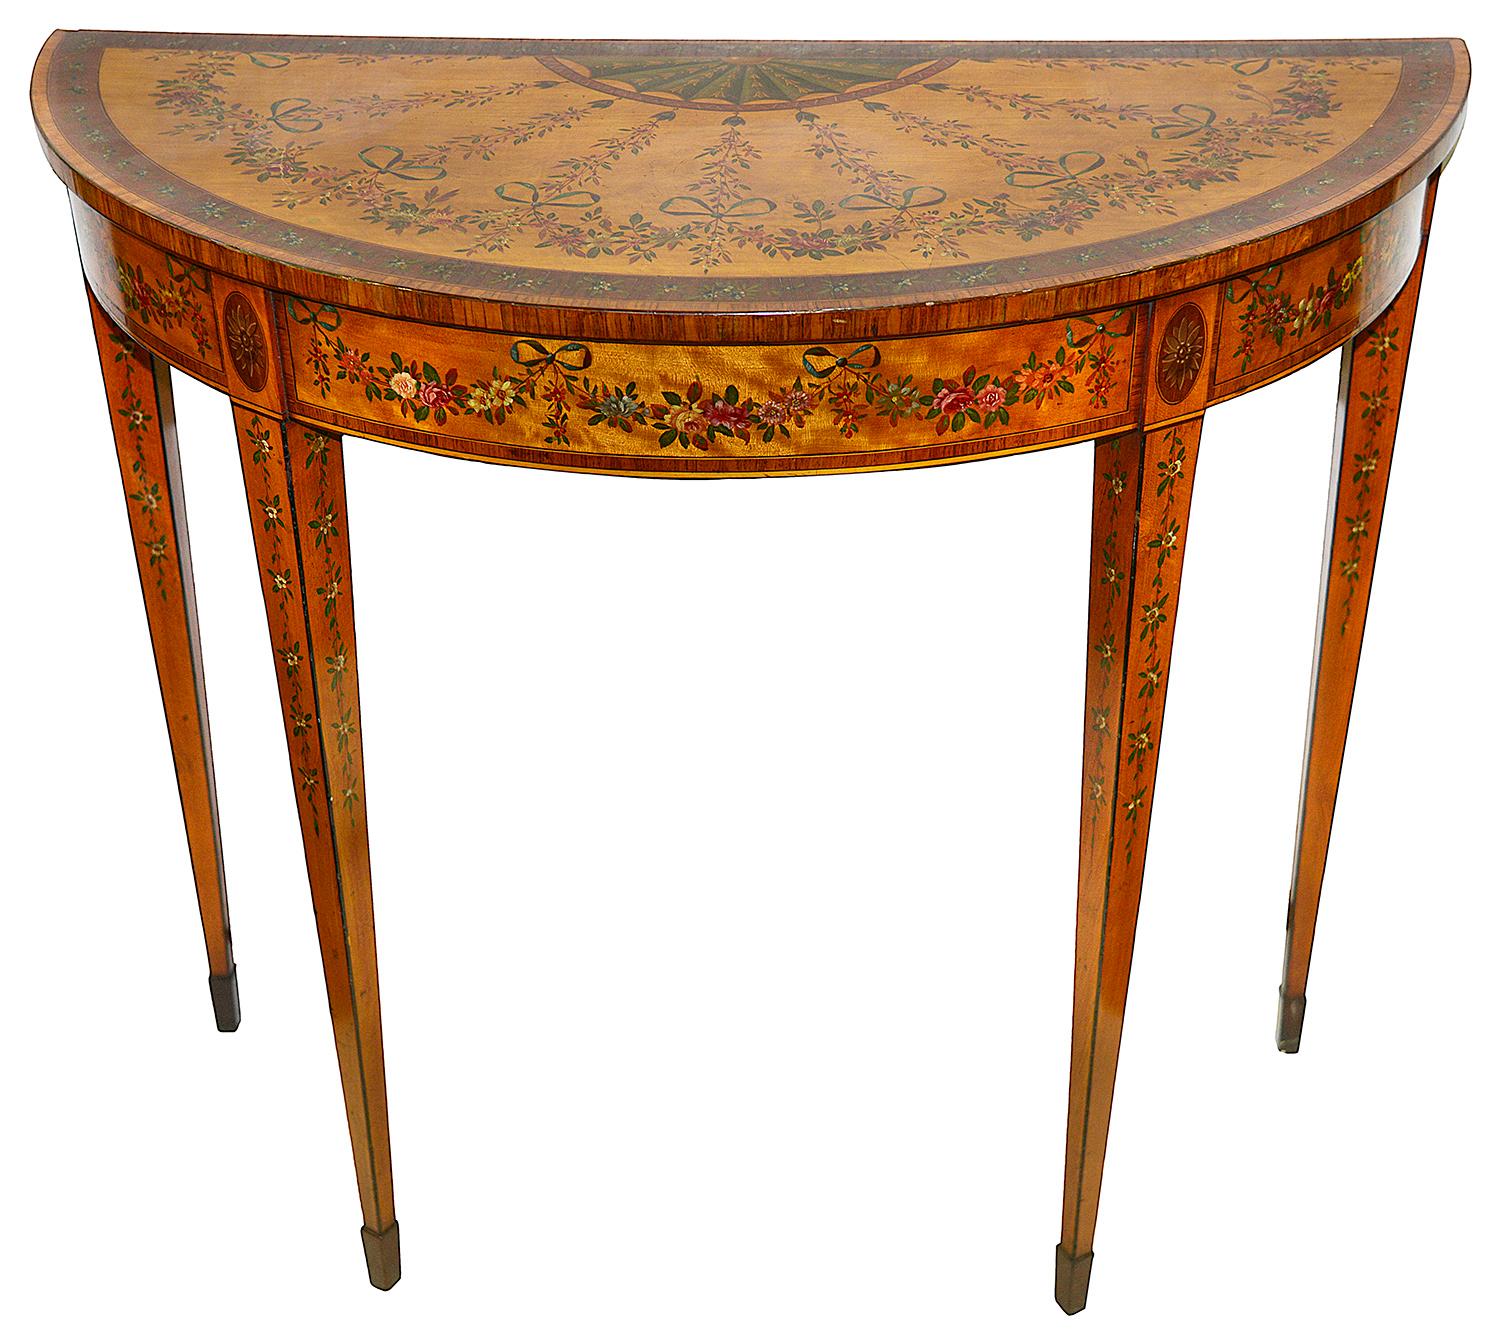 A fine quality pair of 18th Century Satinwood demi lune side tables, each with wonderful hand painted floral swag and ribbon decoration, raised on square tapering legs.